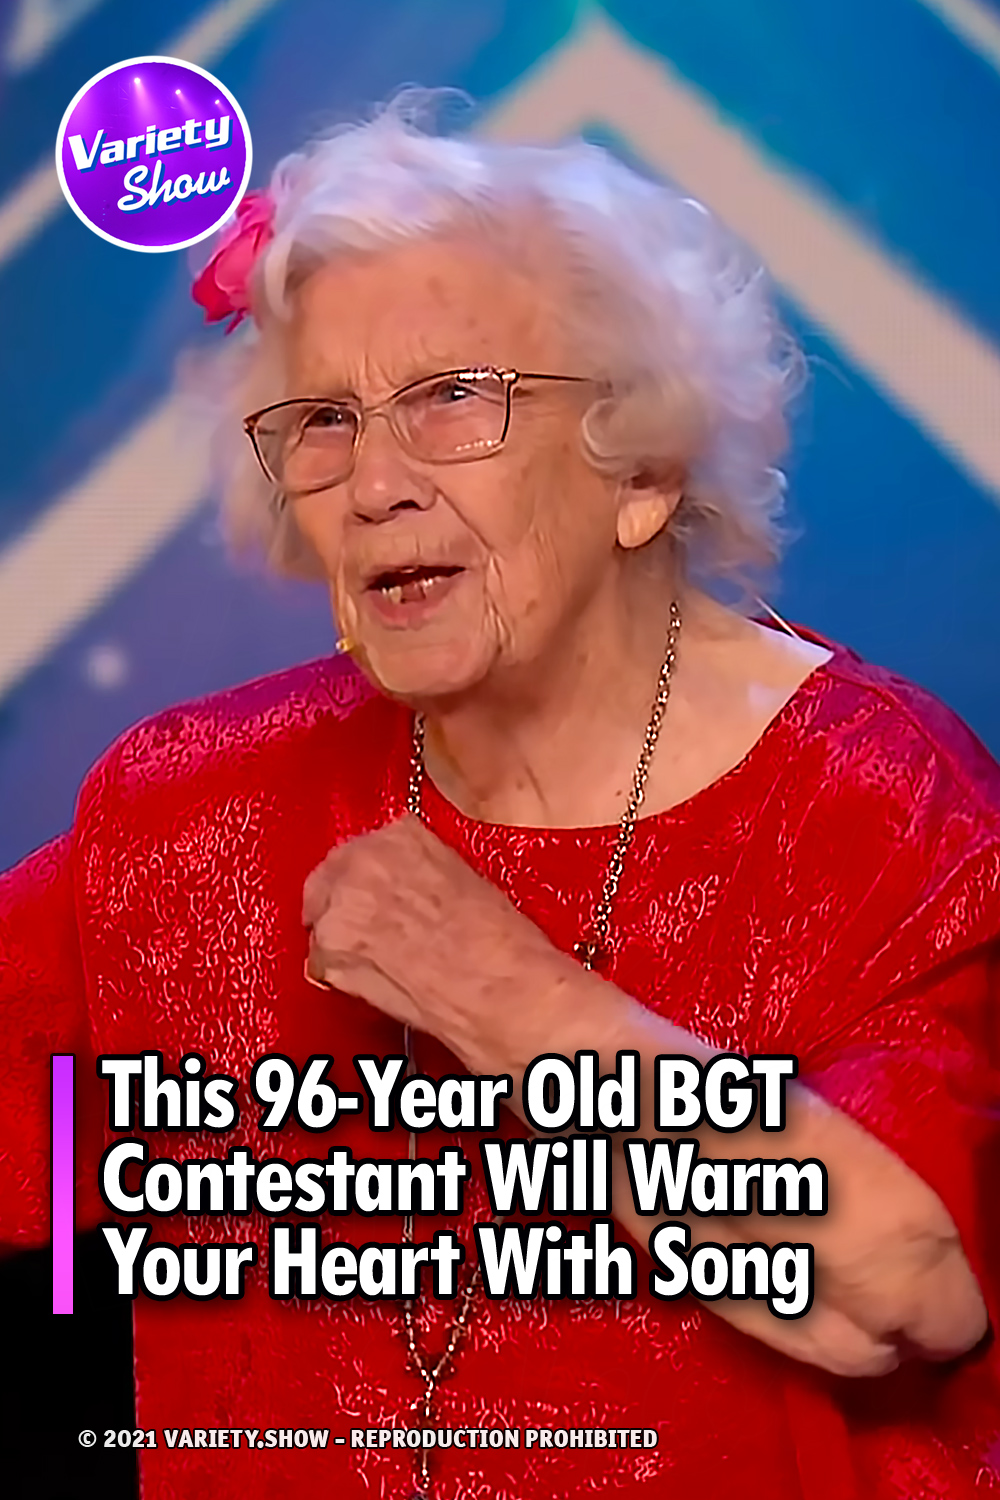 This 96-Year Old BGT Contestant Will Warm Your Heart With Song